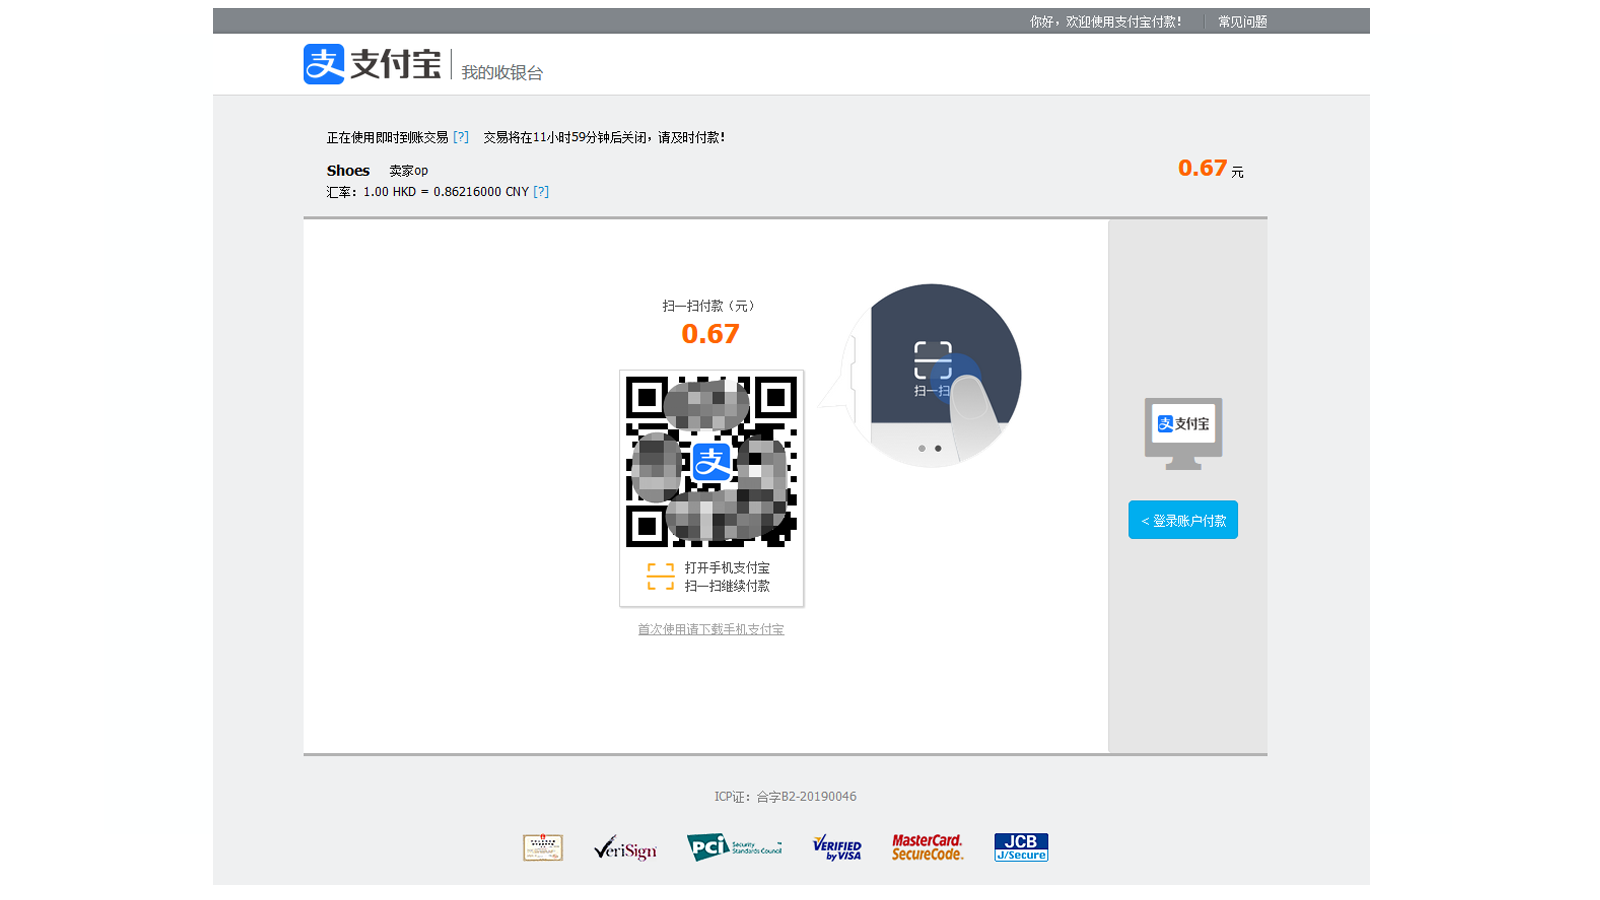 Alipay payment page.